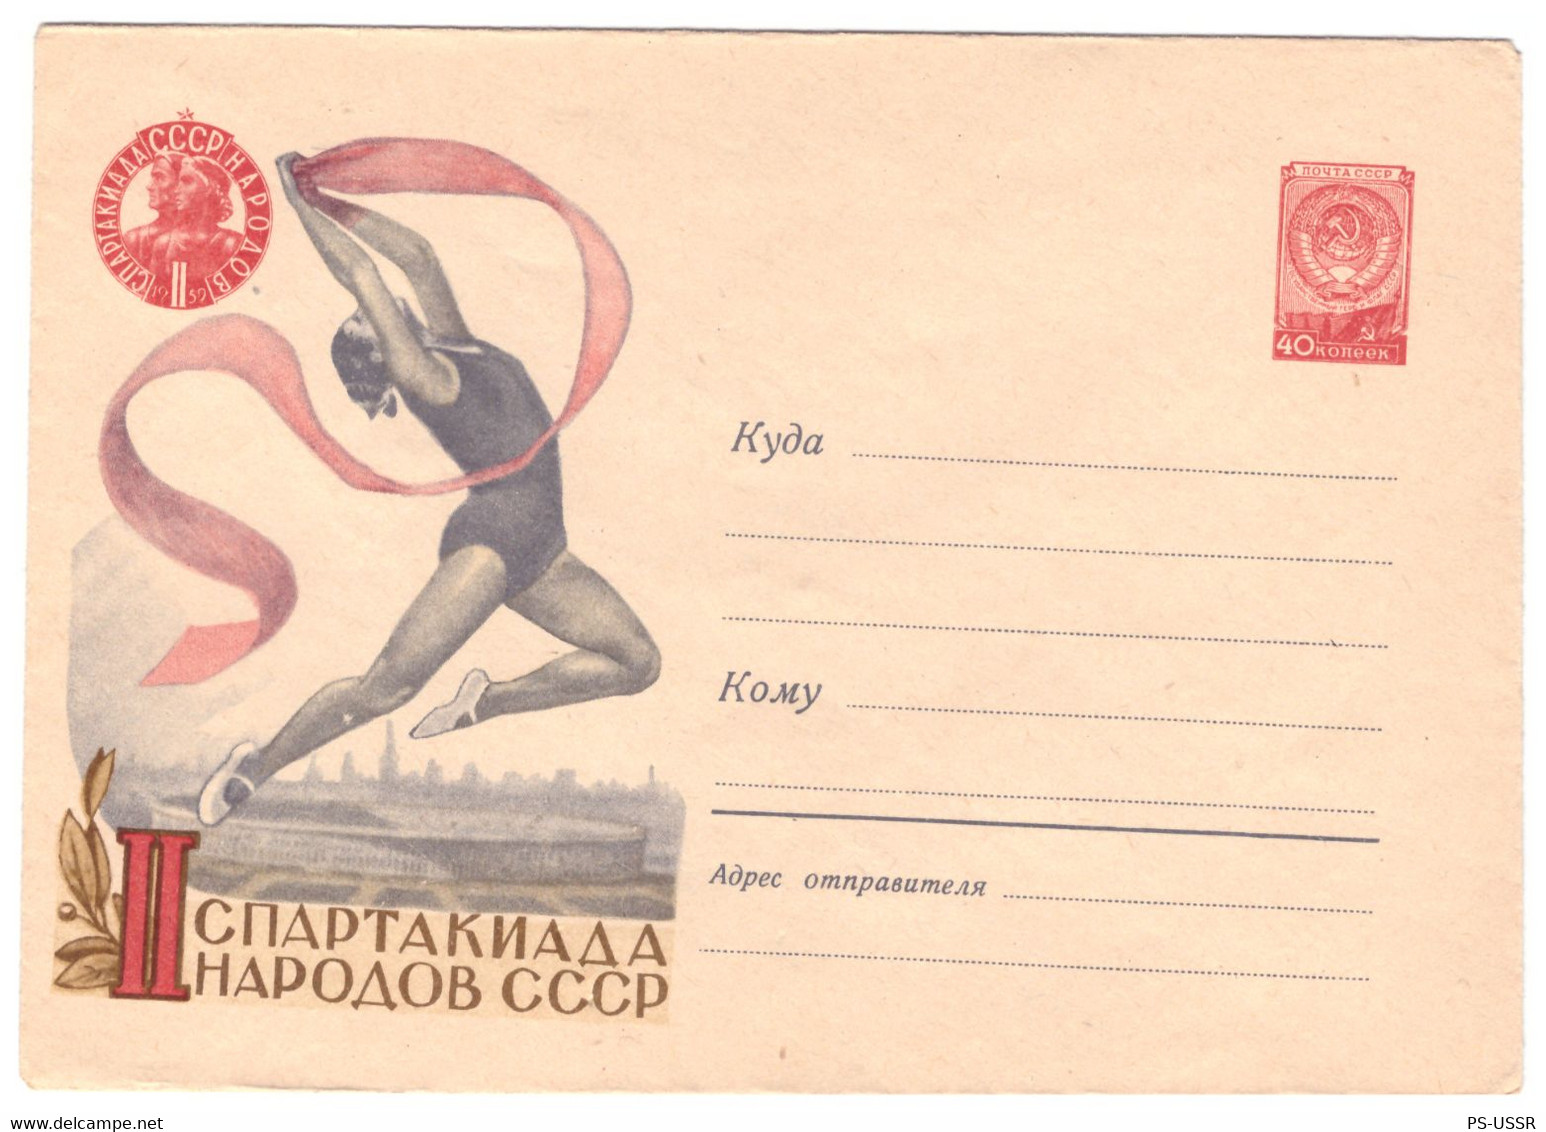 USSR 1959 GYMNASTICS II SPARTAKIAD OF THE NATIONS PSE UNUSED COVER ILLUSTRATED STAMPED ENVELOPE GANZSACHE SOVIET UNION - 1950-59